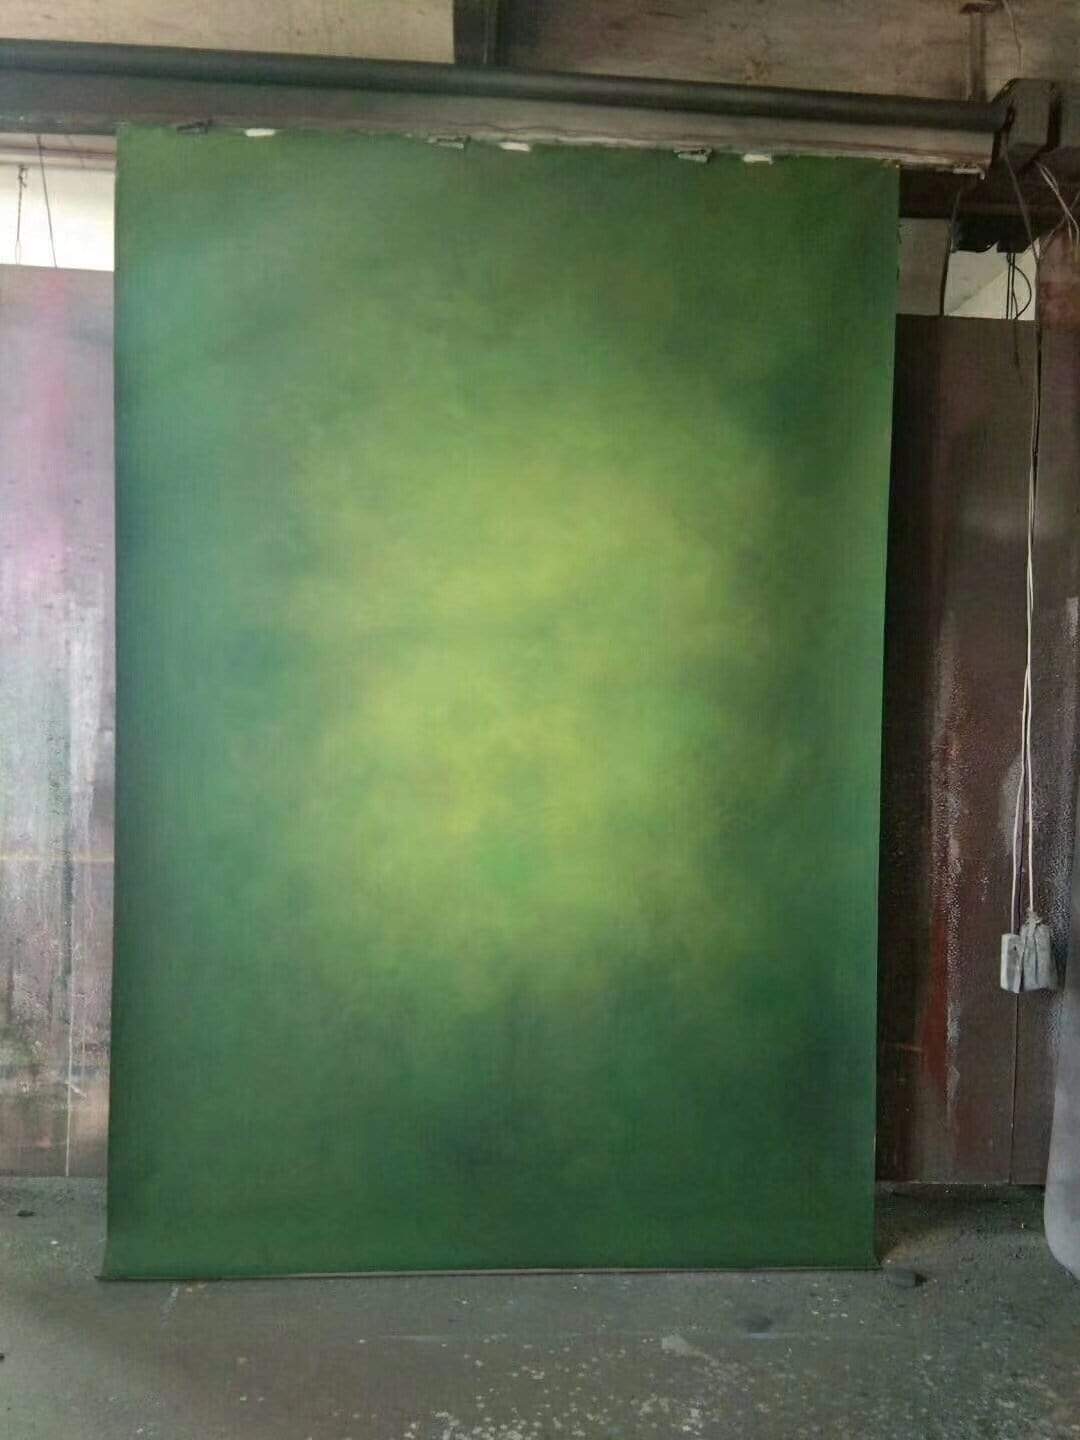 Katebackdrop£ºKate Foggy Green Abstract Gradient Texture Spray Painted Backdrop